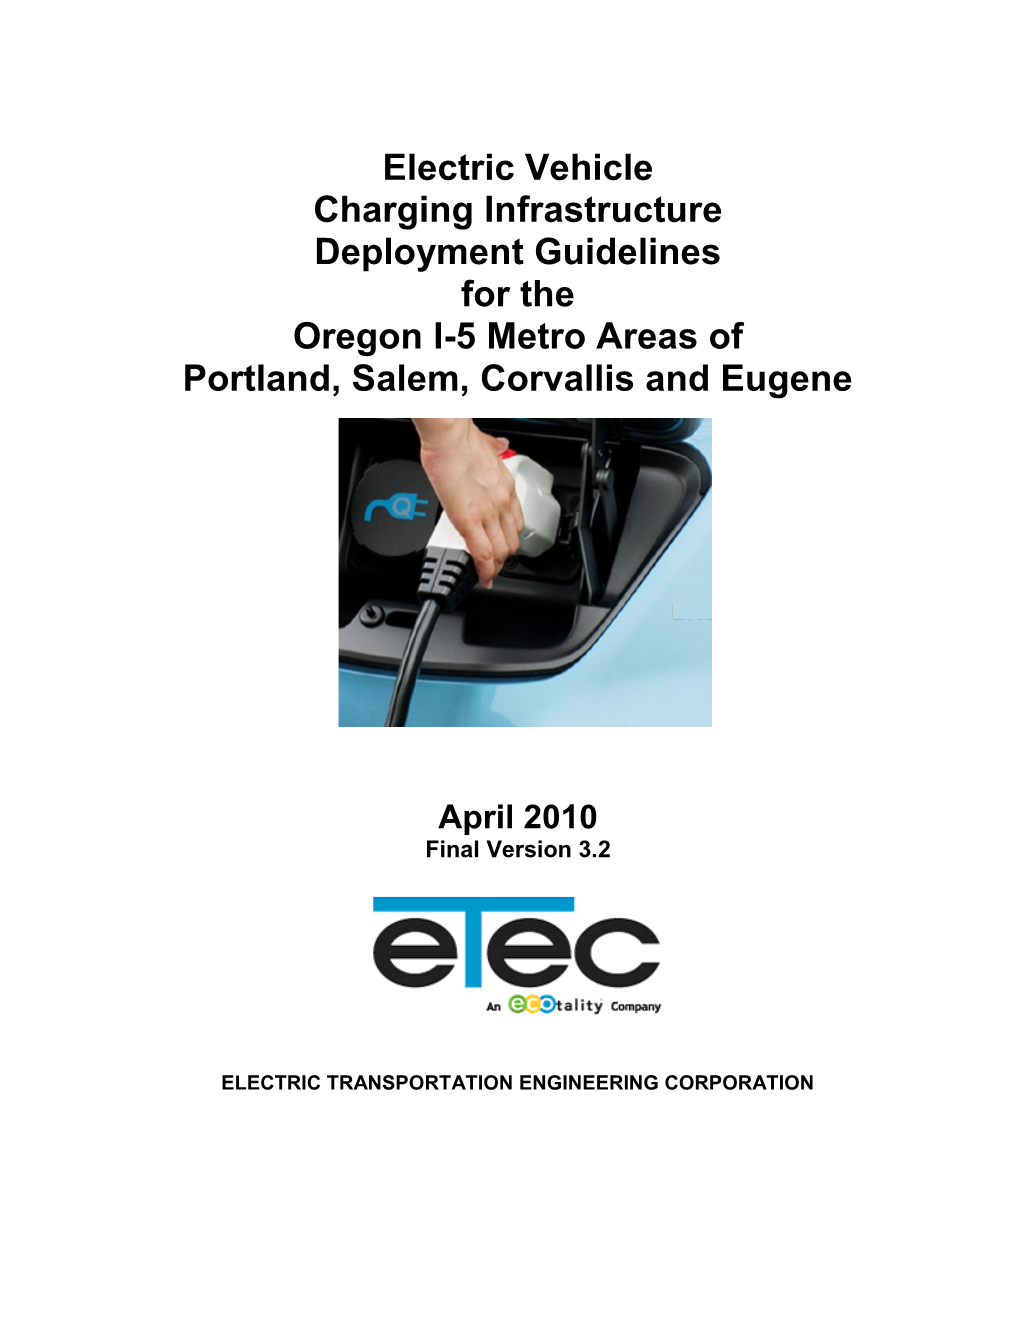 Electric Vehicle Charging Infrastructure Guidelines